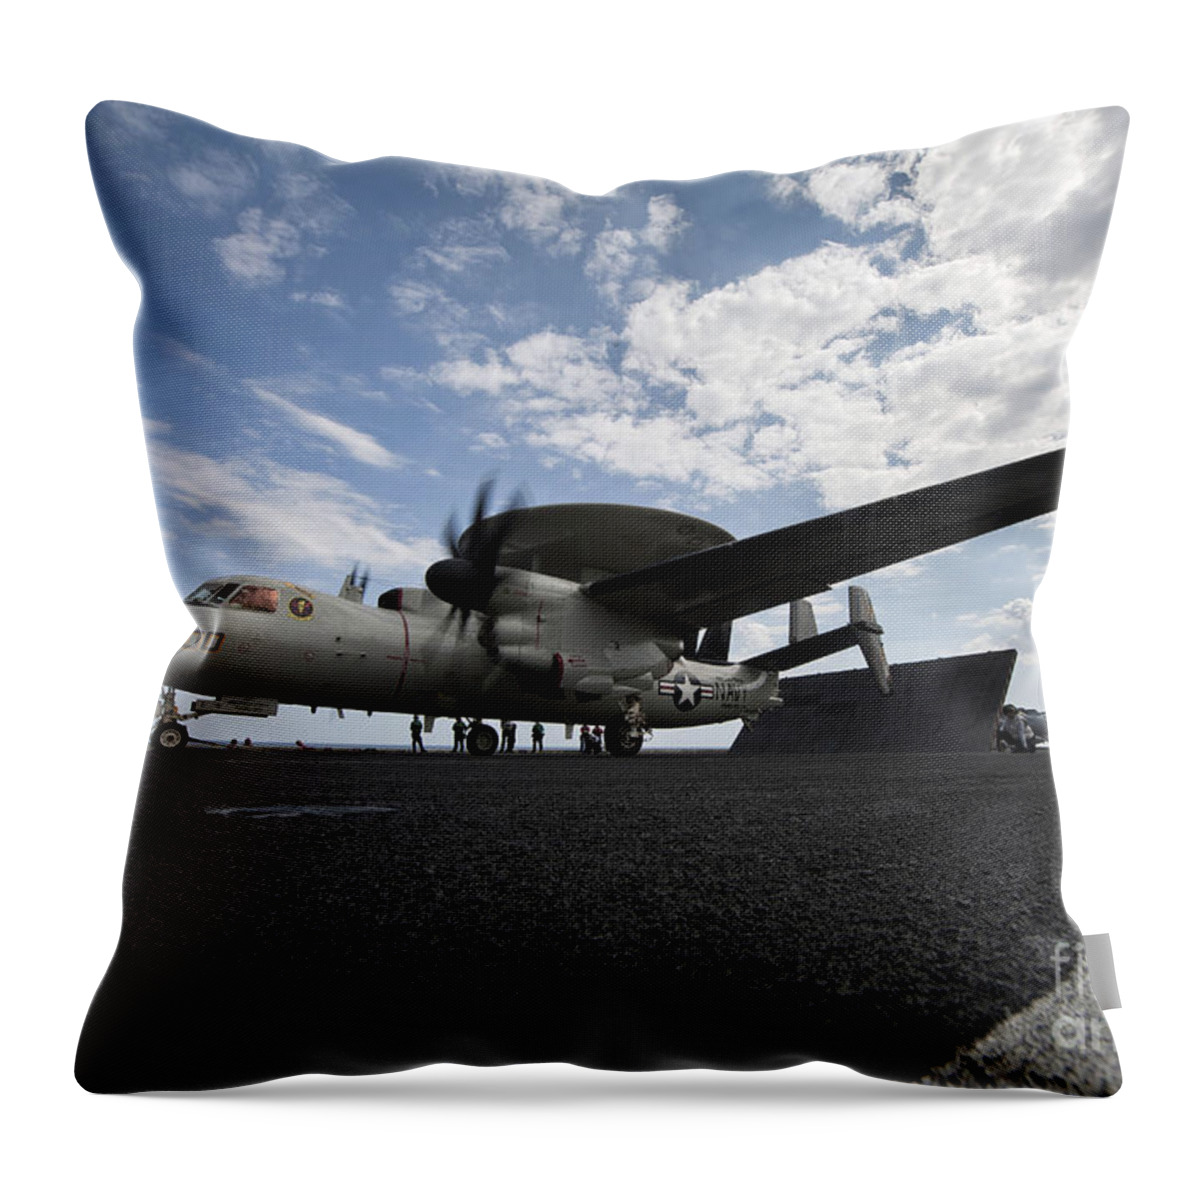 Motioning Throw Pillow featuring the photograph An E-2c Hawkeye Aircraft Prepares by Stocktrek Images